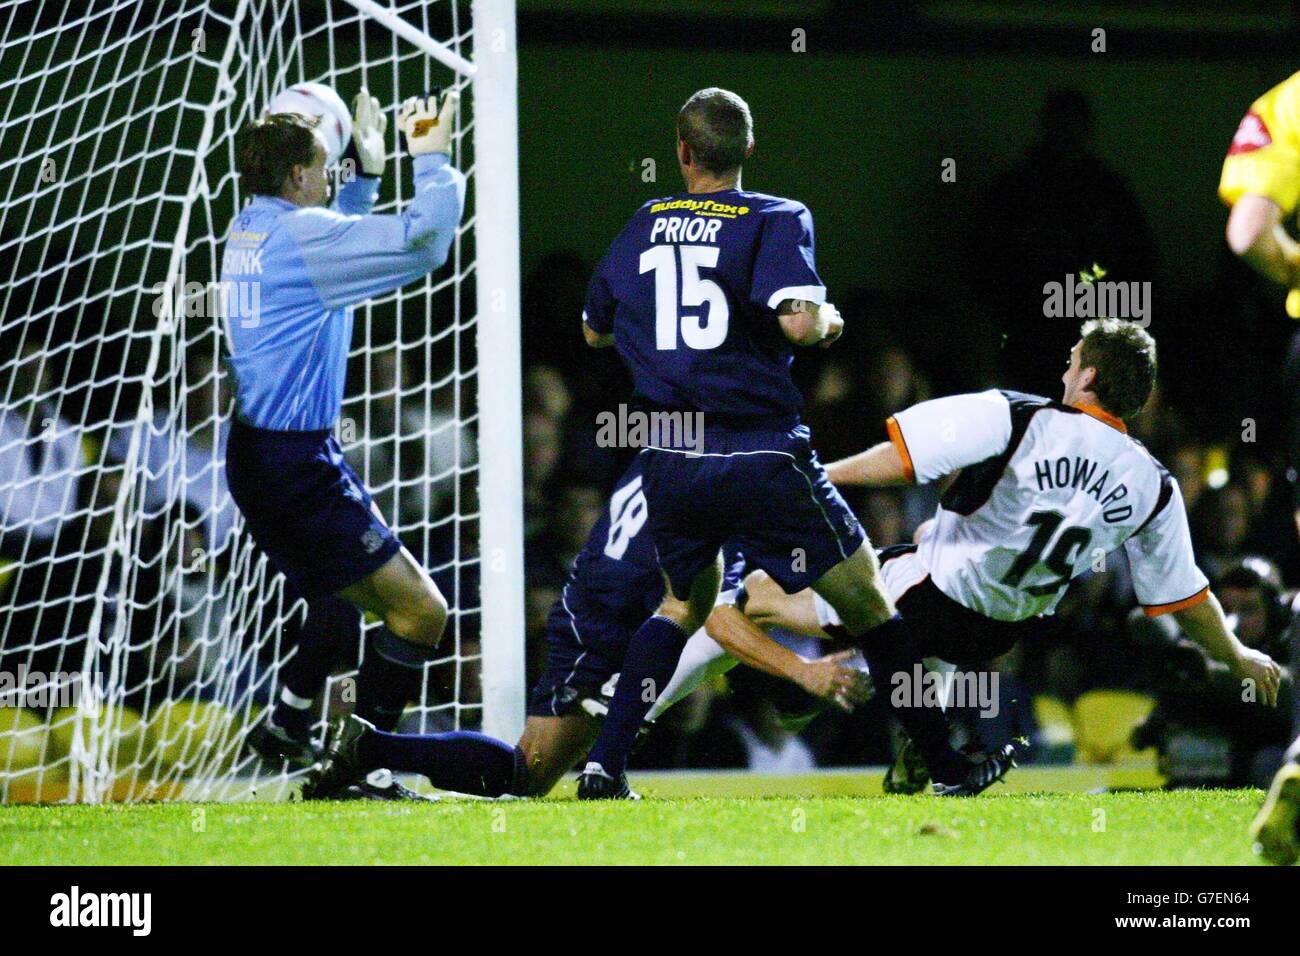 Luton Town's Steve Howard (right) scores against Southend during the FA Cup first round match at Roots Hall, Southend. NO UNOFFICIAL CLUB WEBSITE USE. Stock Photo